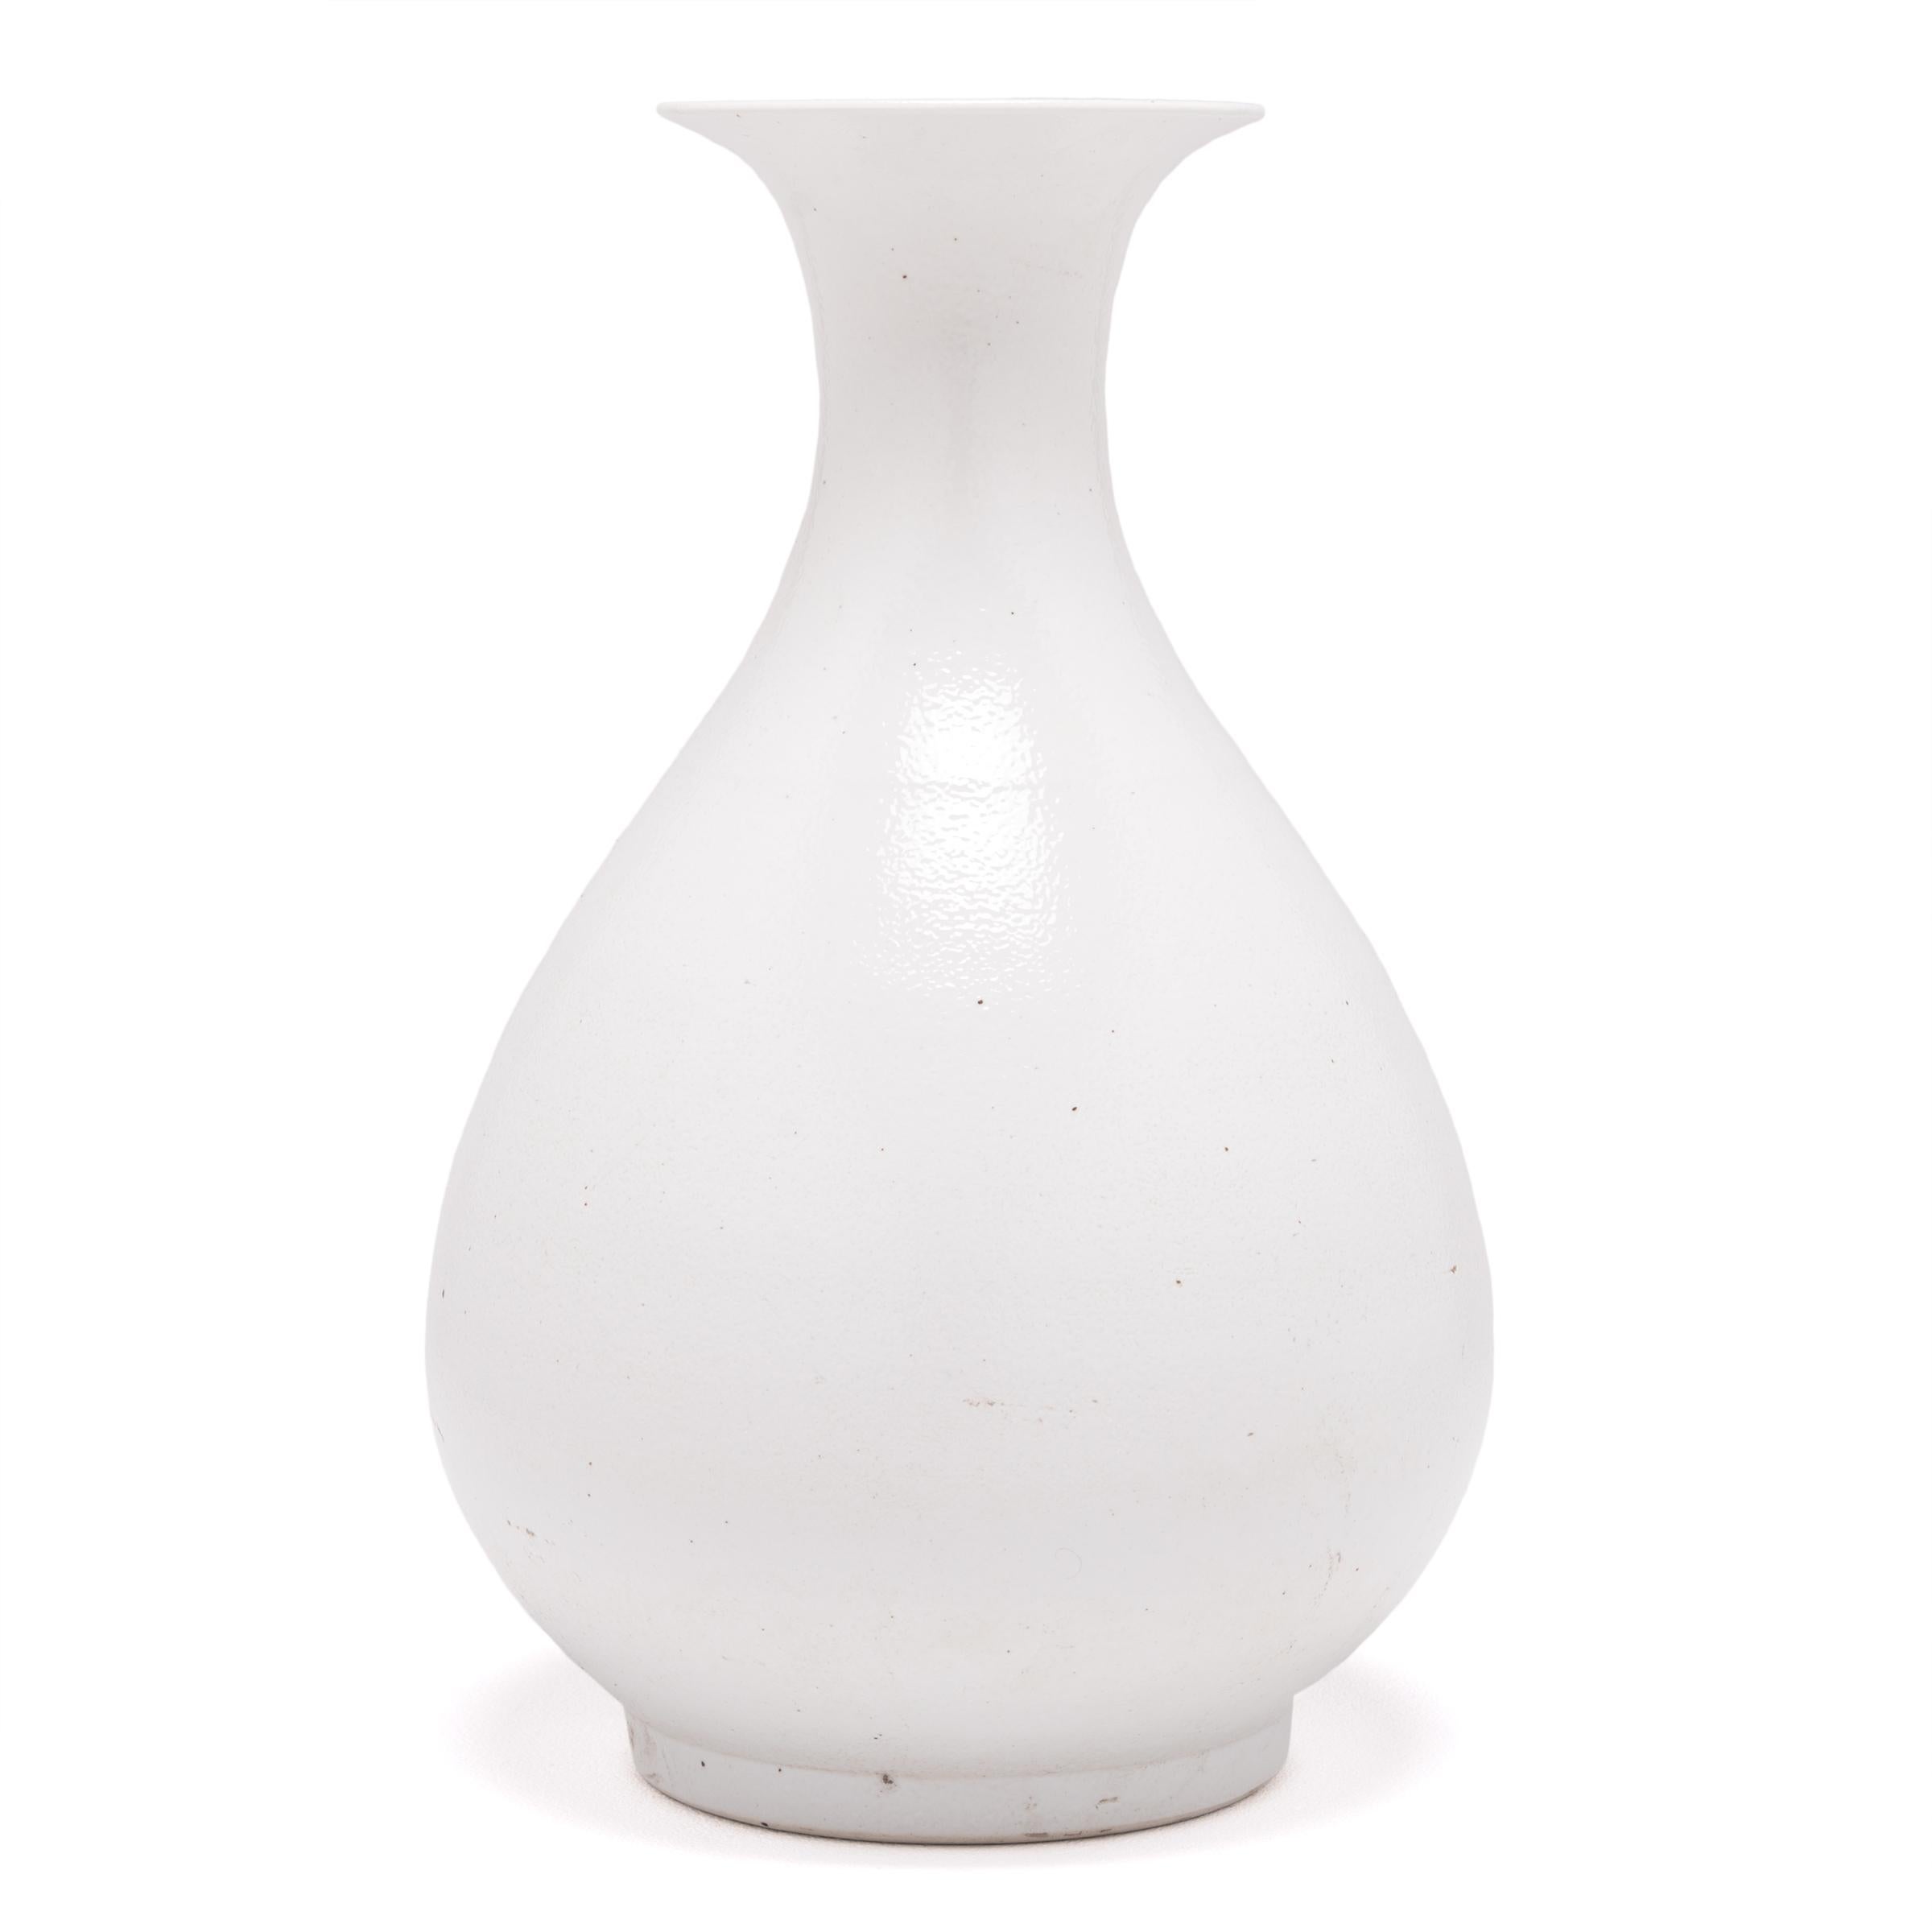 Drawing on a long Chinese tradition of monochrome ceramics, this porcelain vase is cloaked in a cool white glaze to highlight its elegant silhouette. The timeless vase form is known as a yuhuchunping or pear-shaped vase and is defined by a rounded